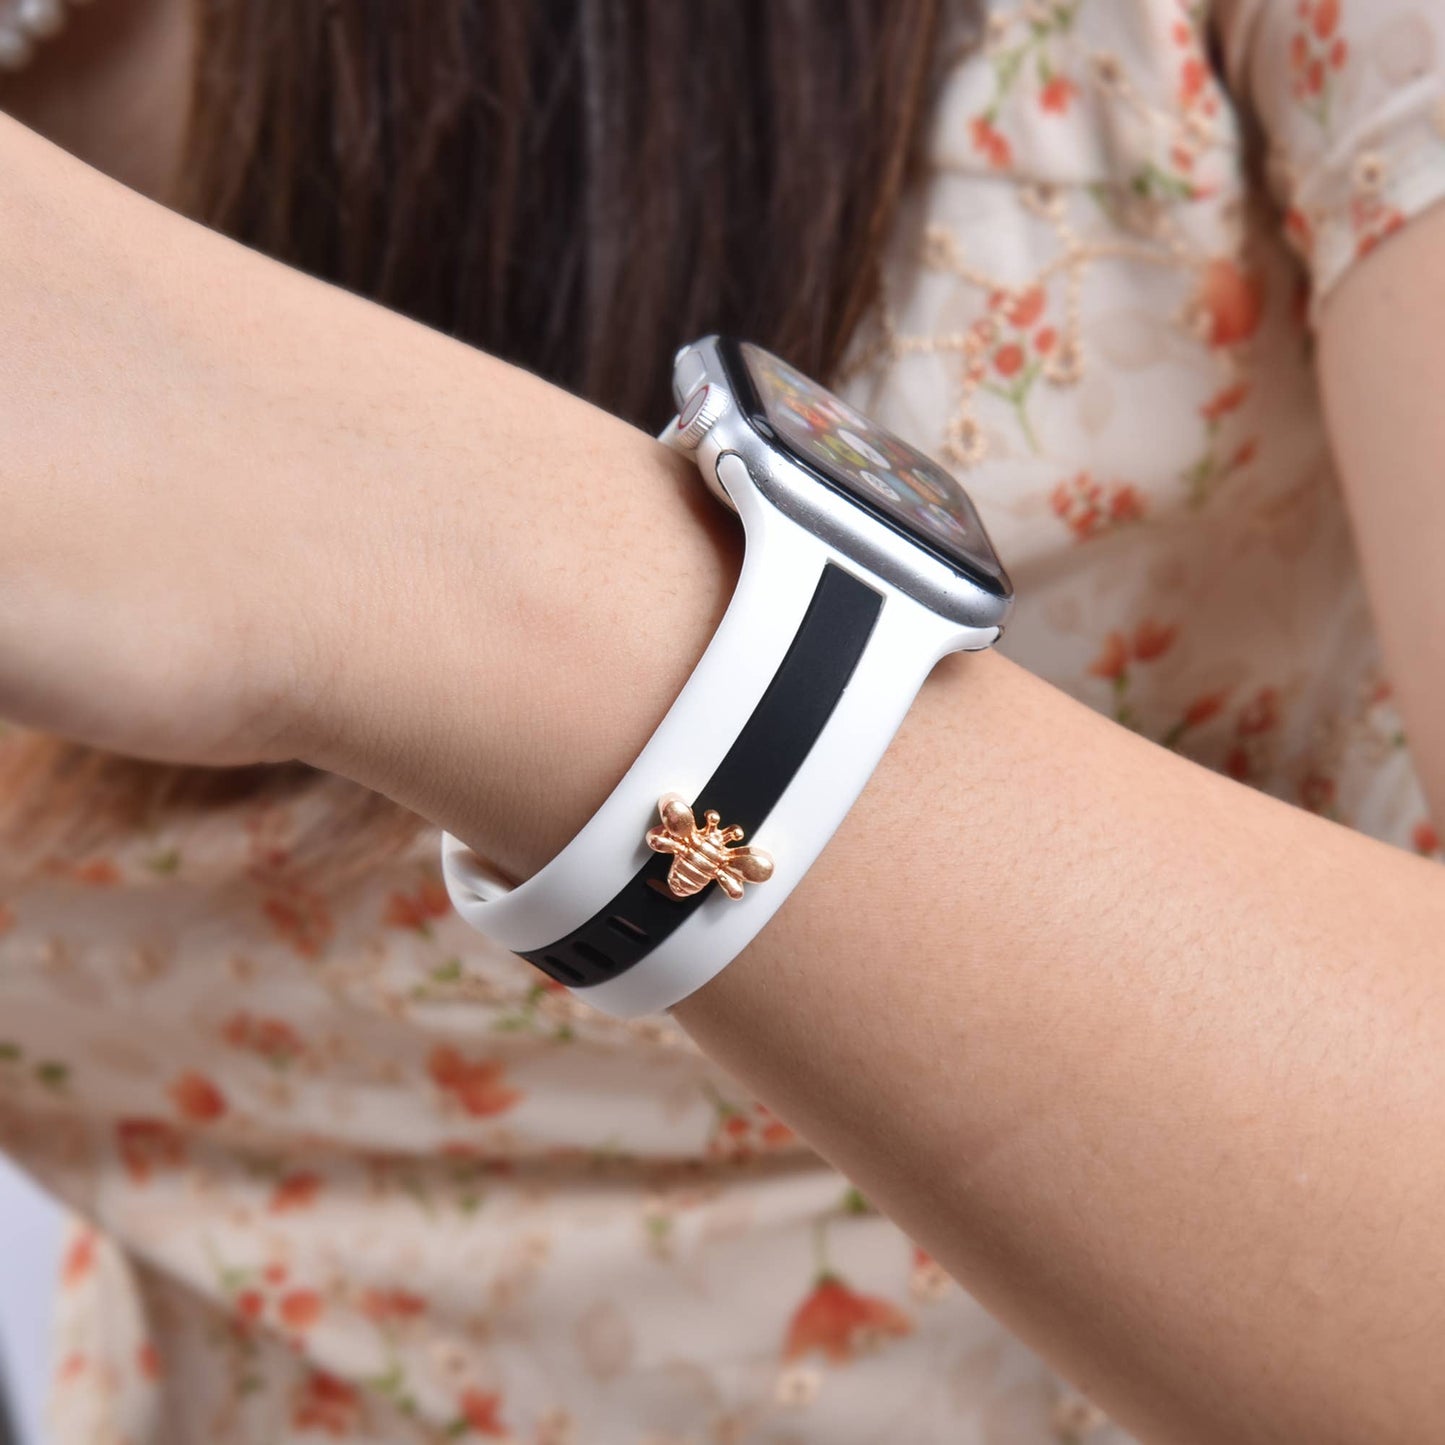 Apple Watch Silicone Band With Bee Charm Stud